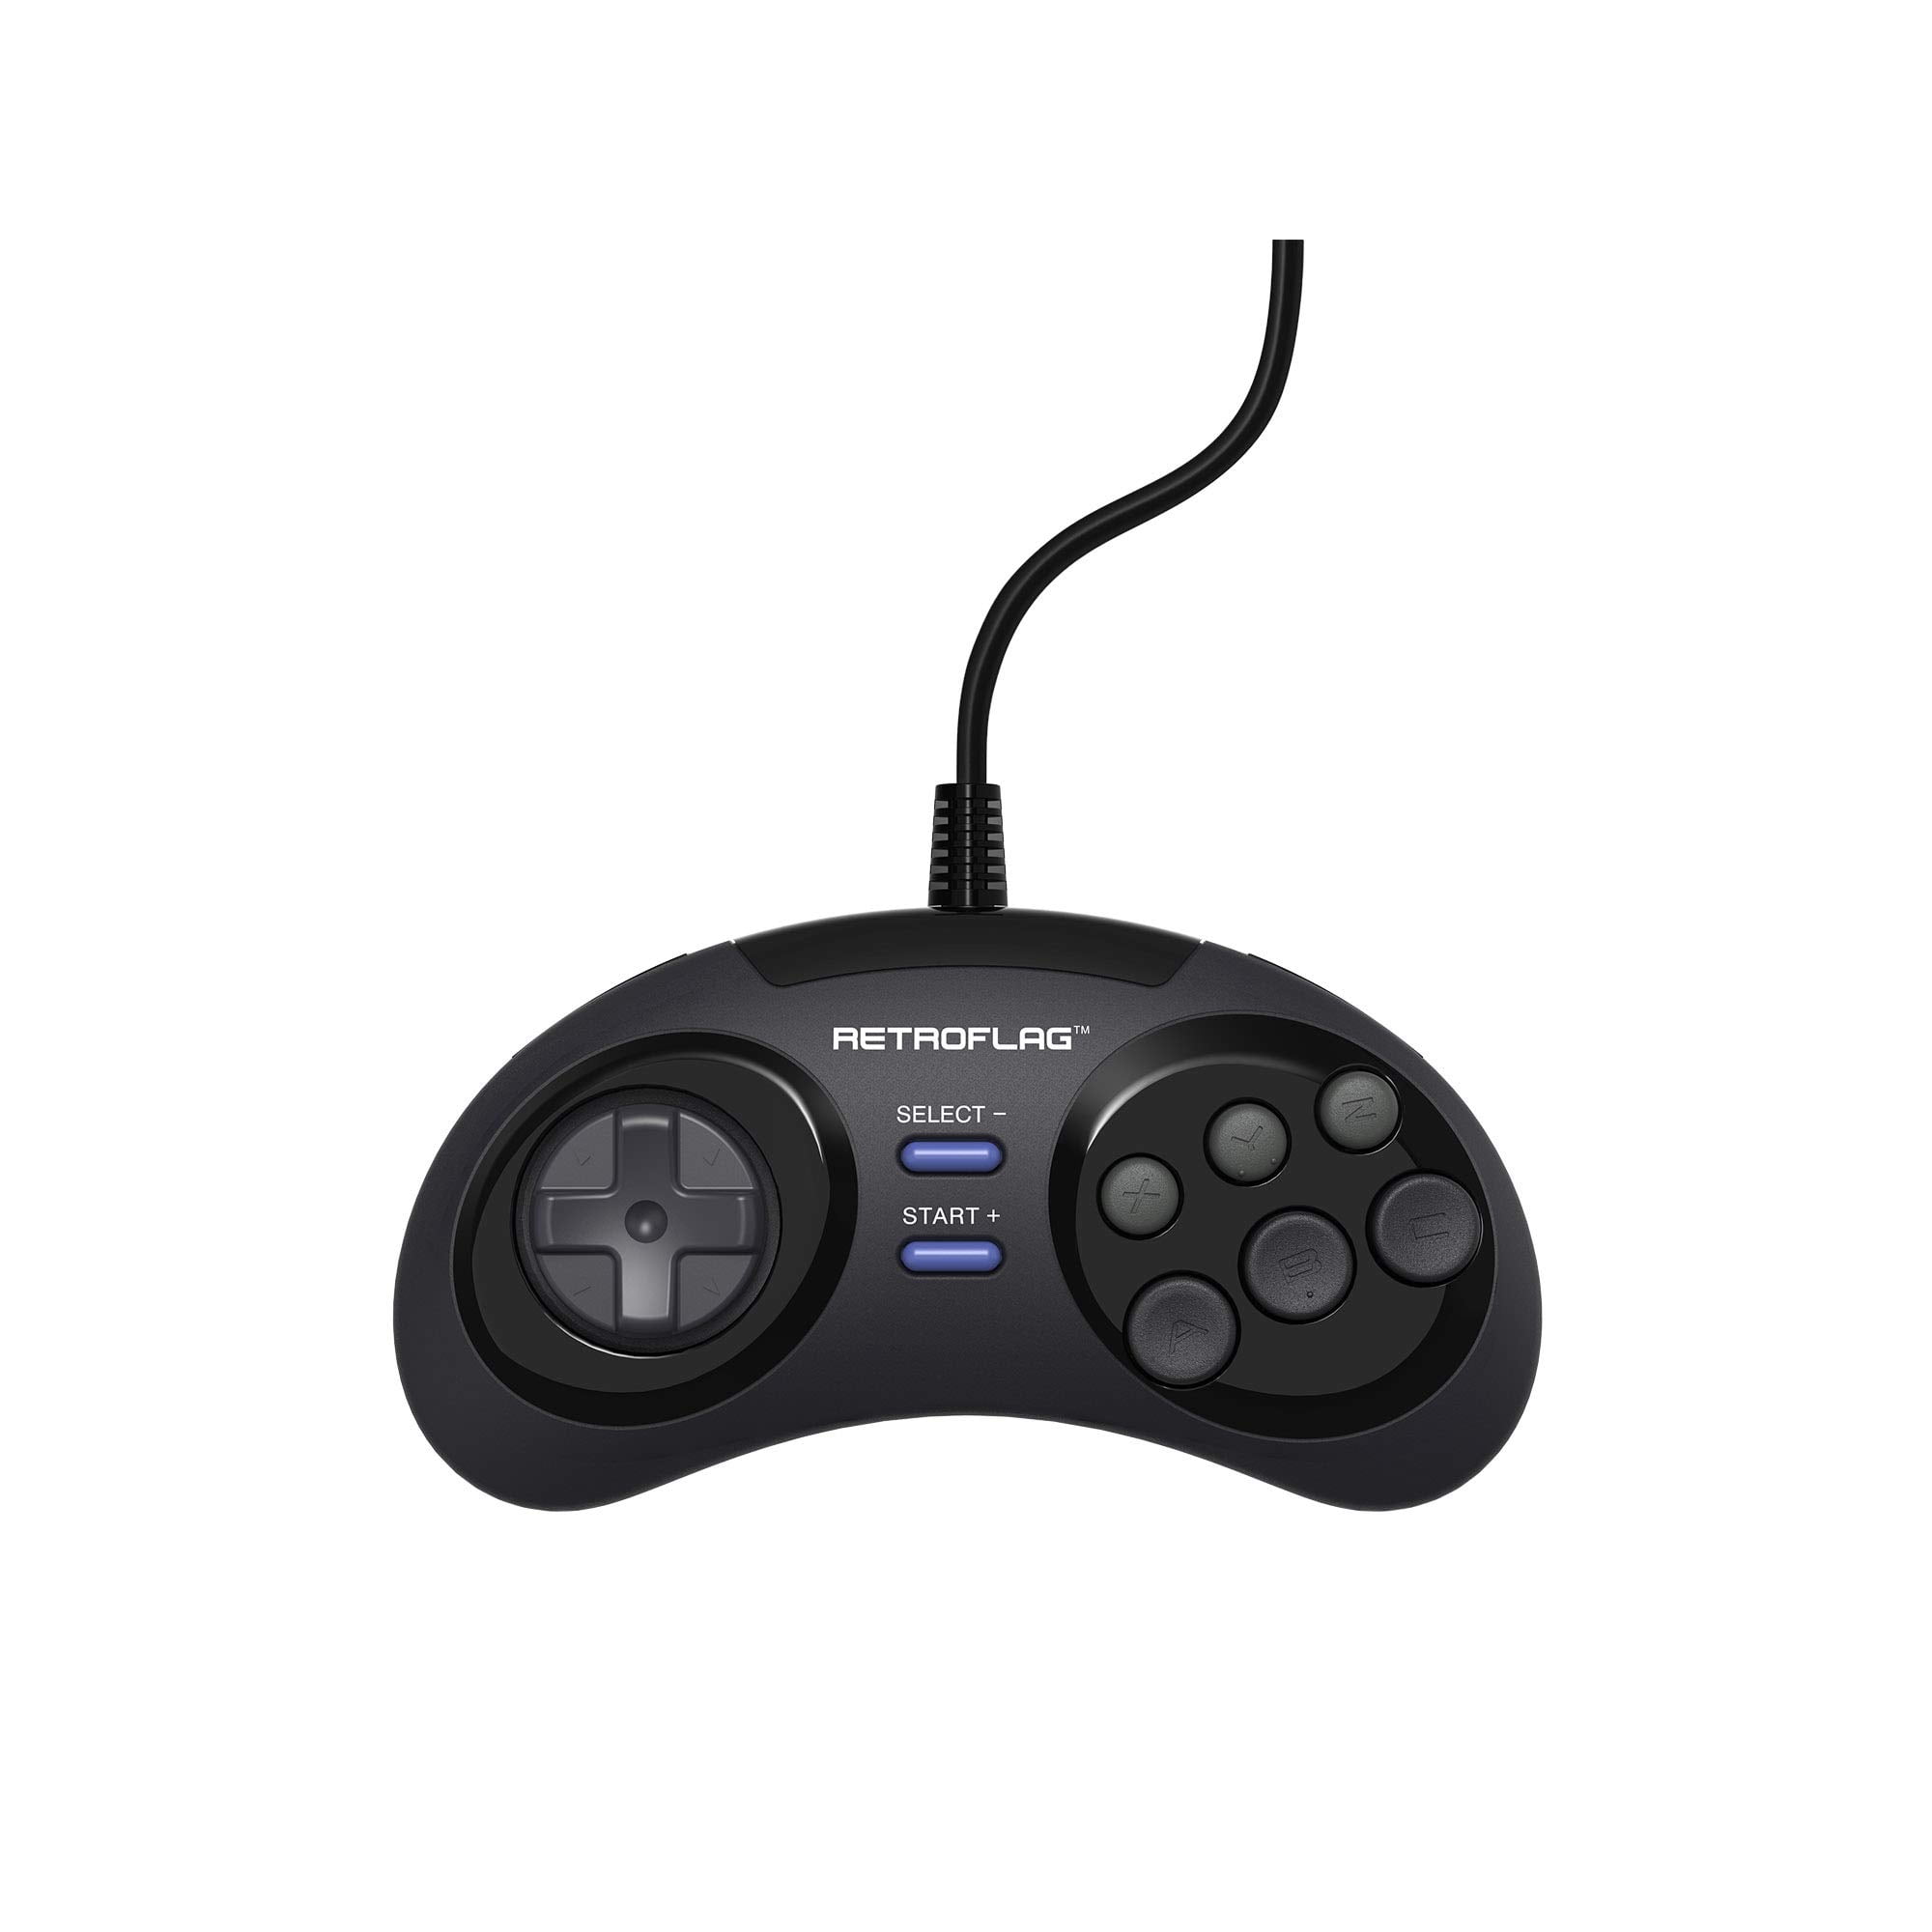 Retroflag Classic Retro Wired Usb Gaming Controller For Pc Switch